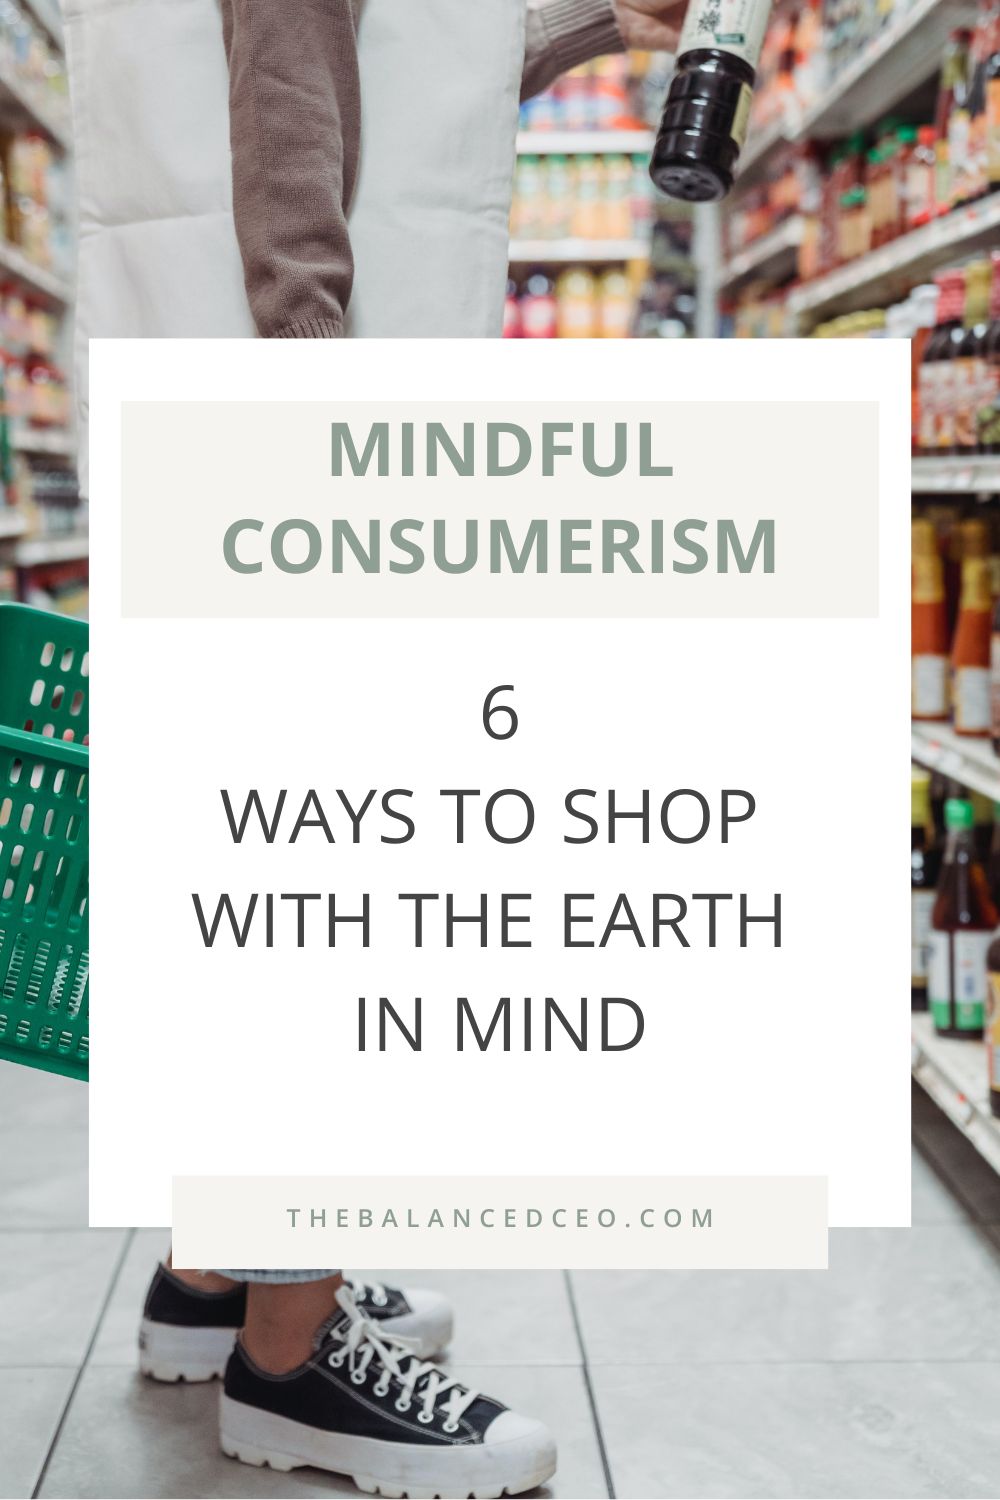 Mindful Consumerism: 6 Ways to Shop with the Earth in Mind